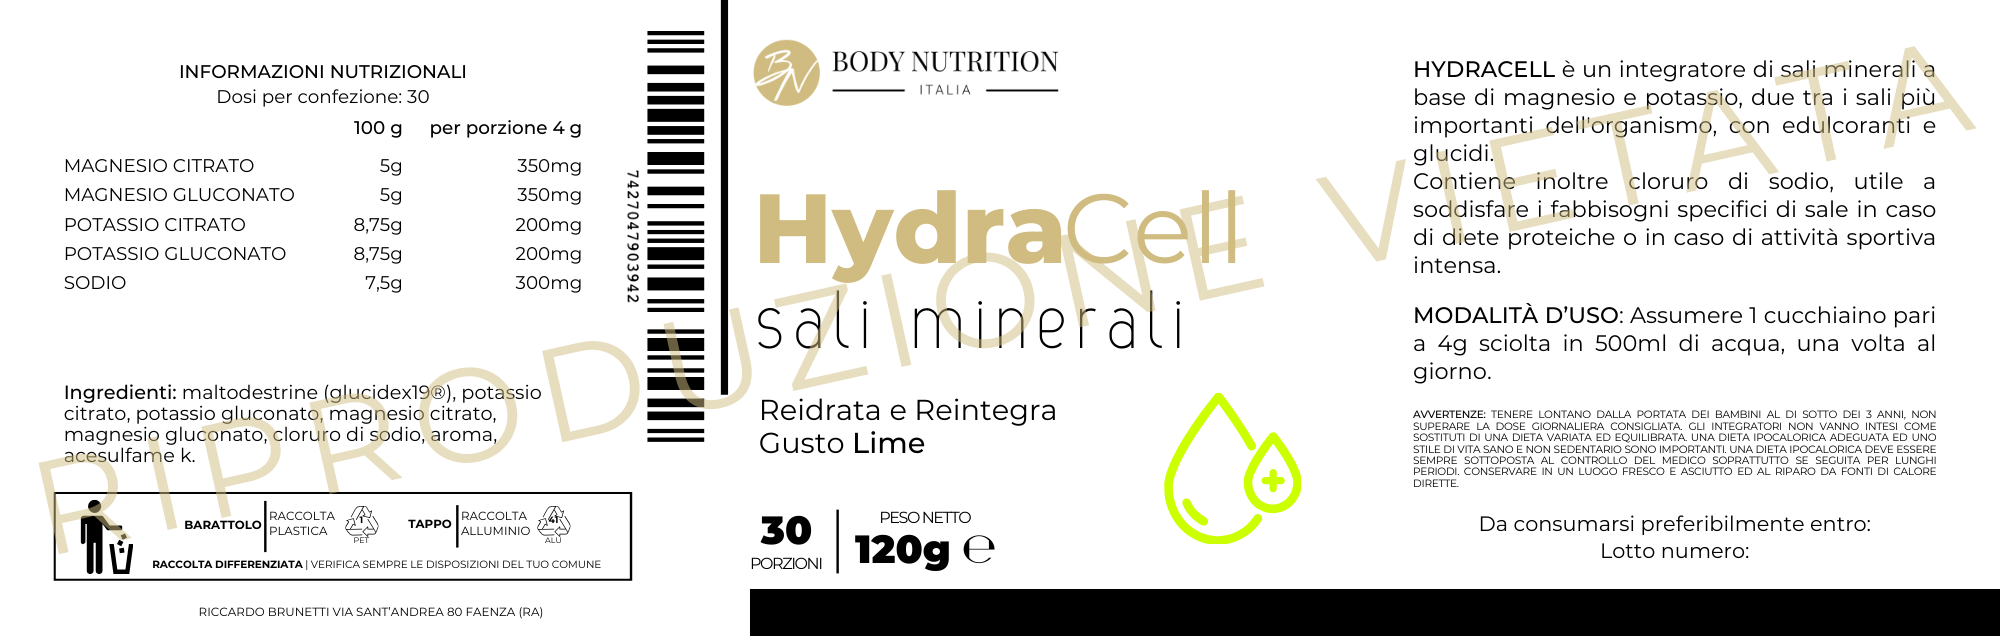 HydraCell